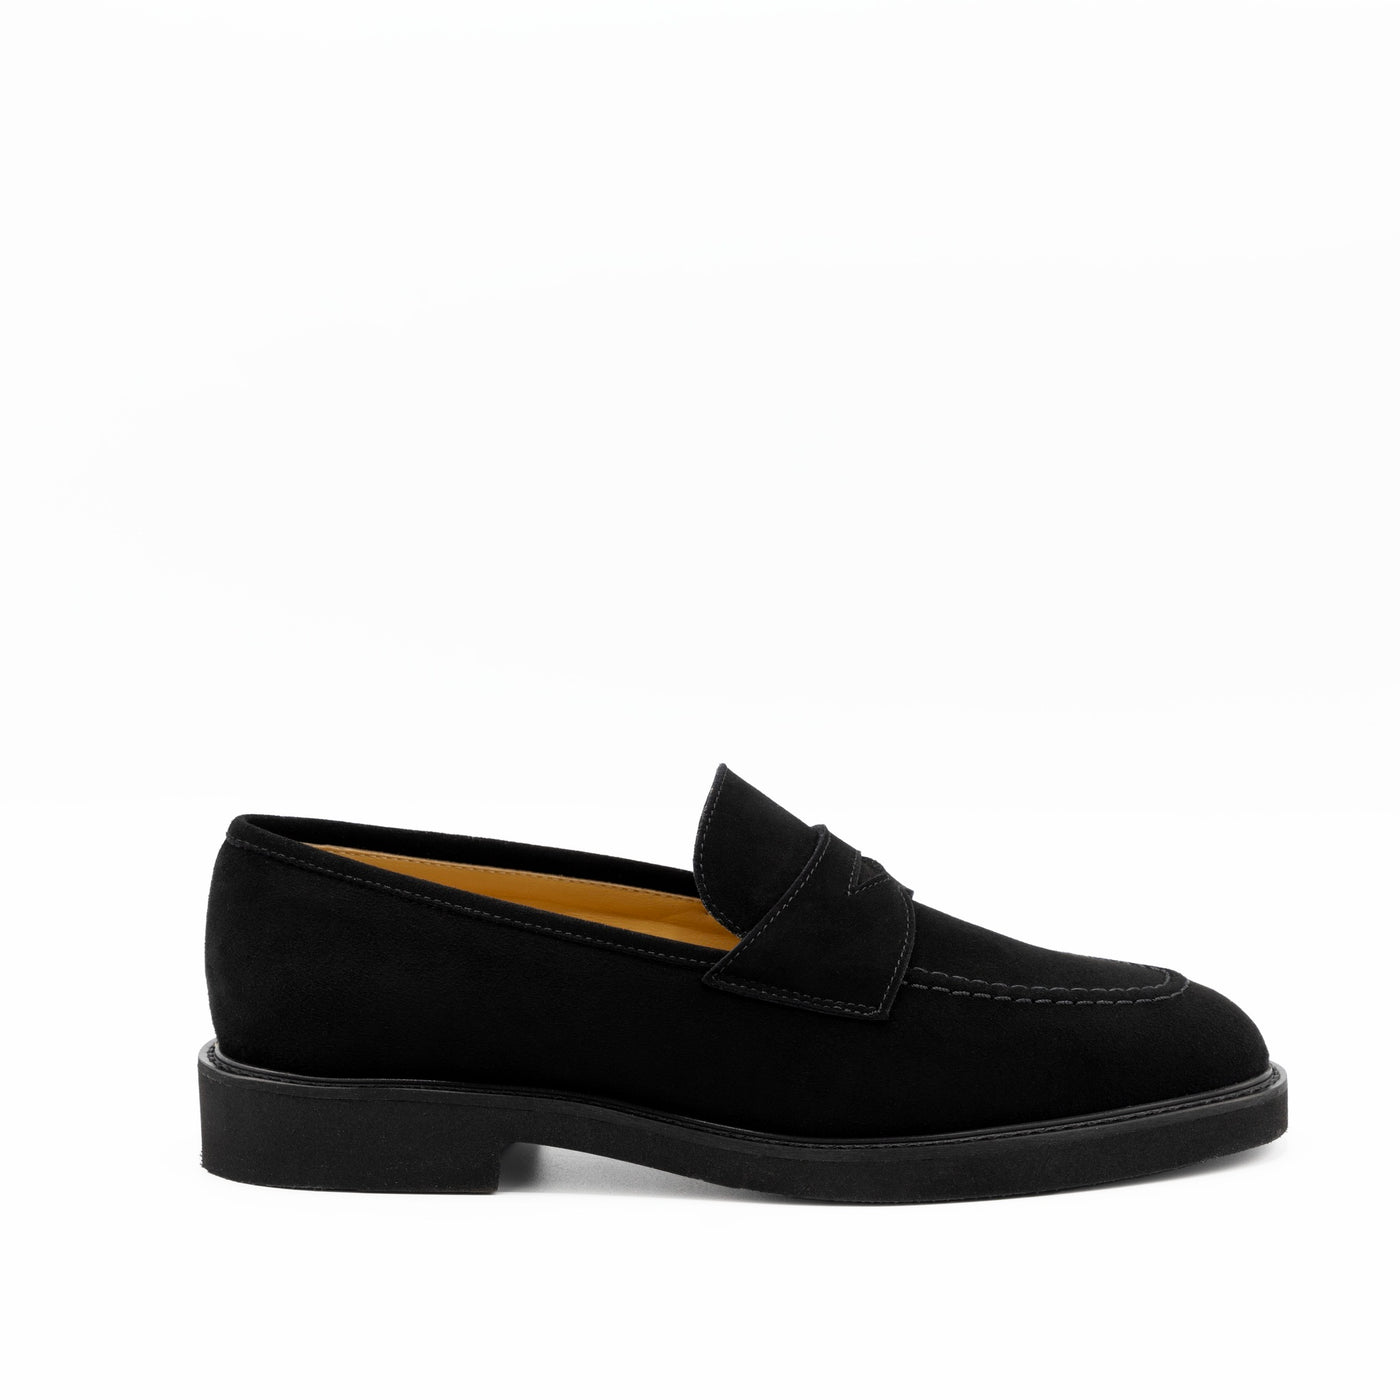 Black suede loafers with rubber soles